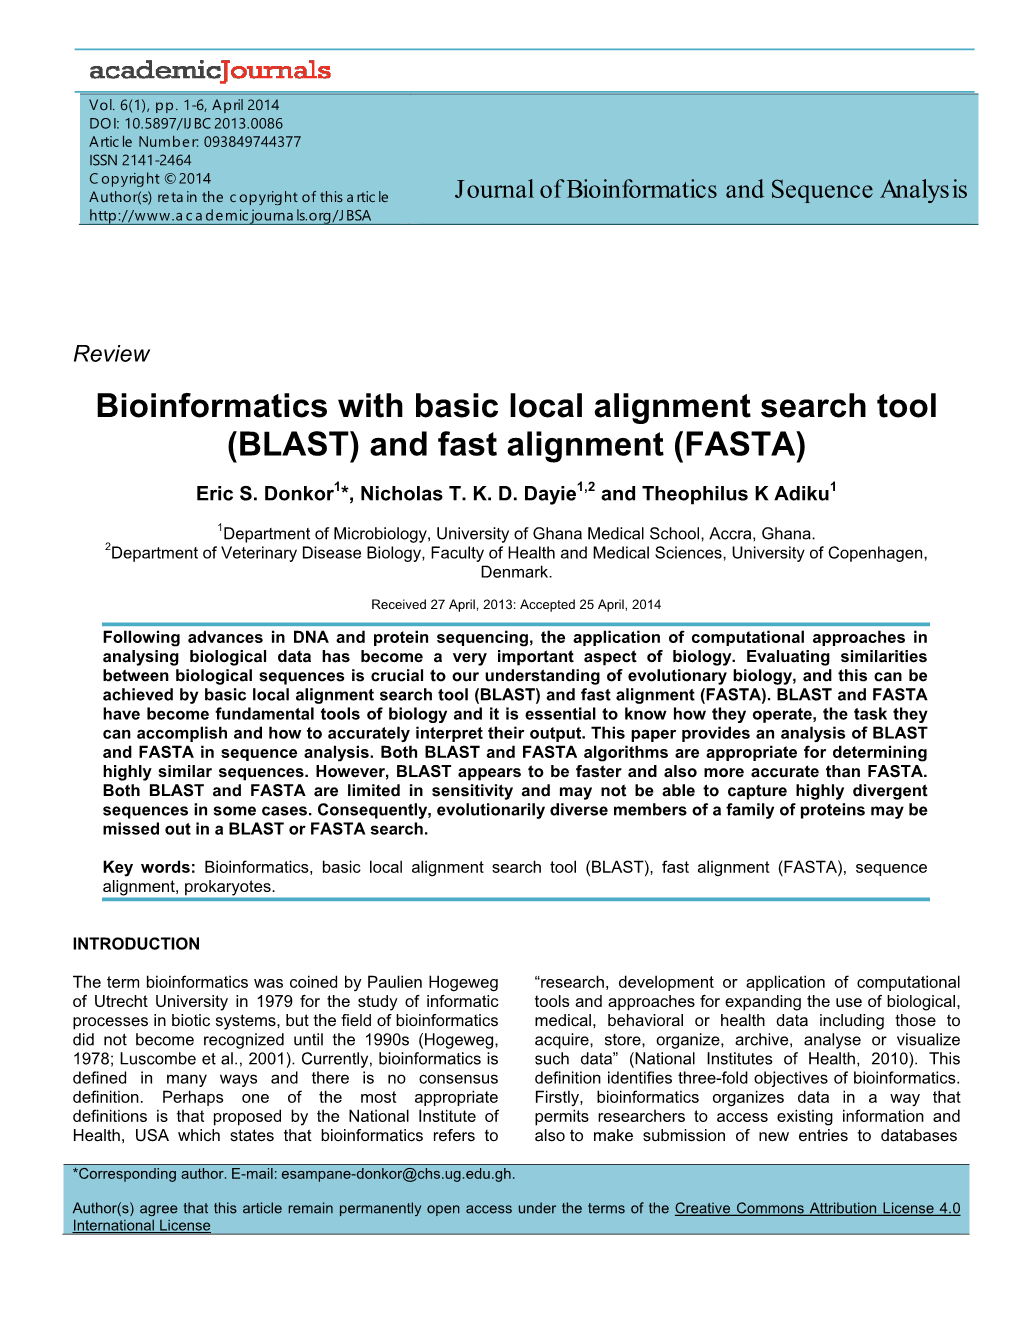 Bioinformatics with Basic Local Alignment Search Tool (BLAST) and Fast Alignment (FASTA)